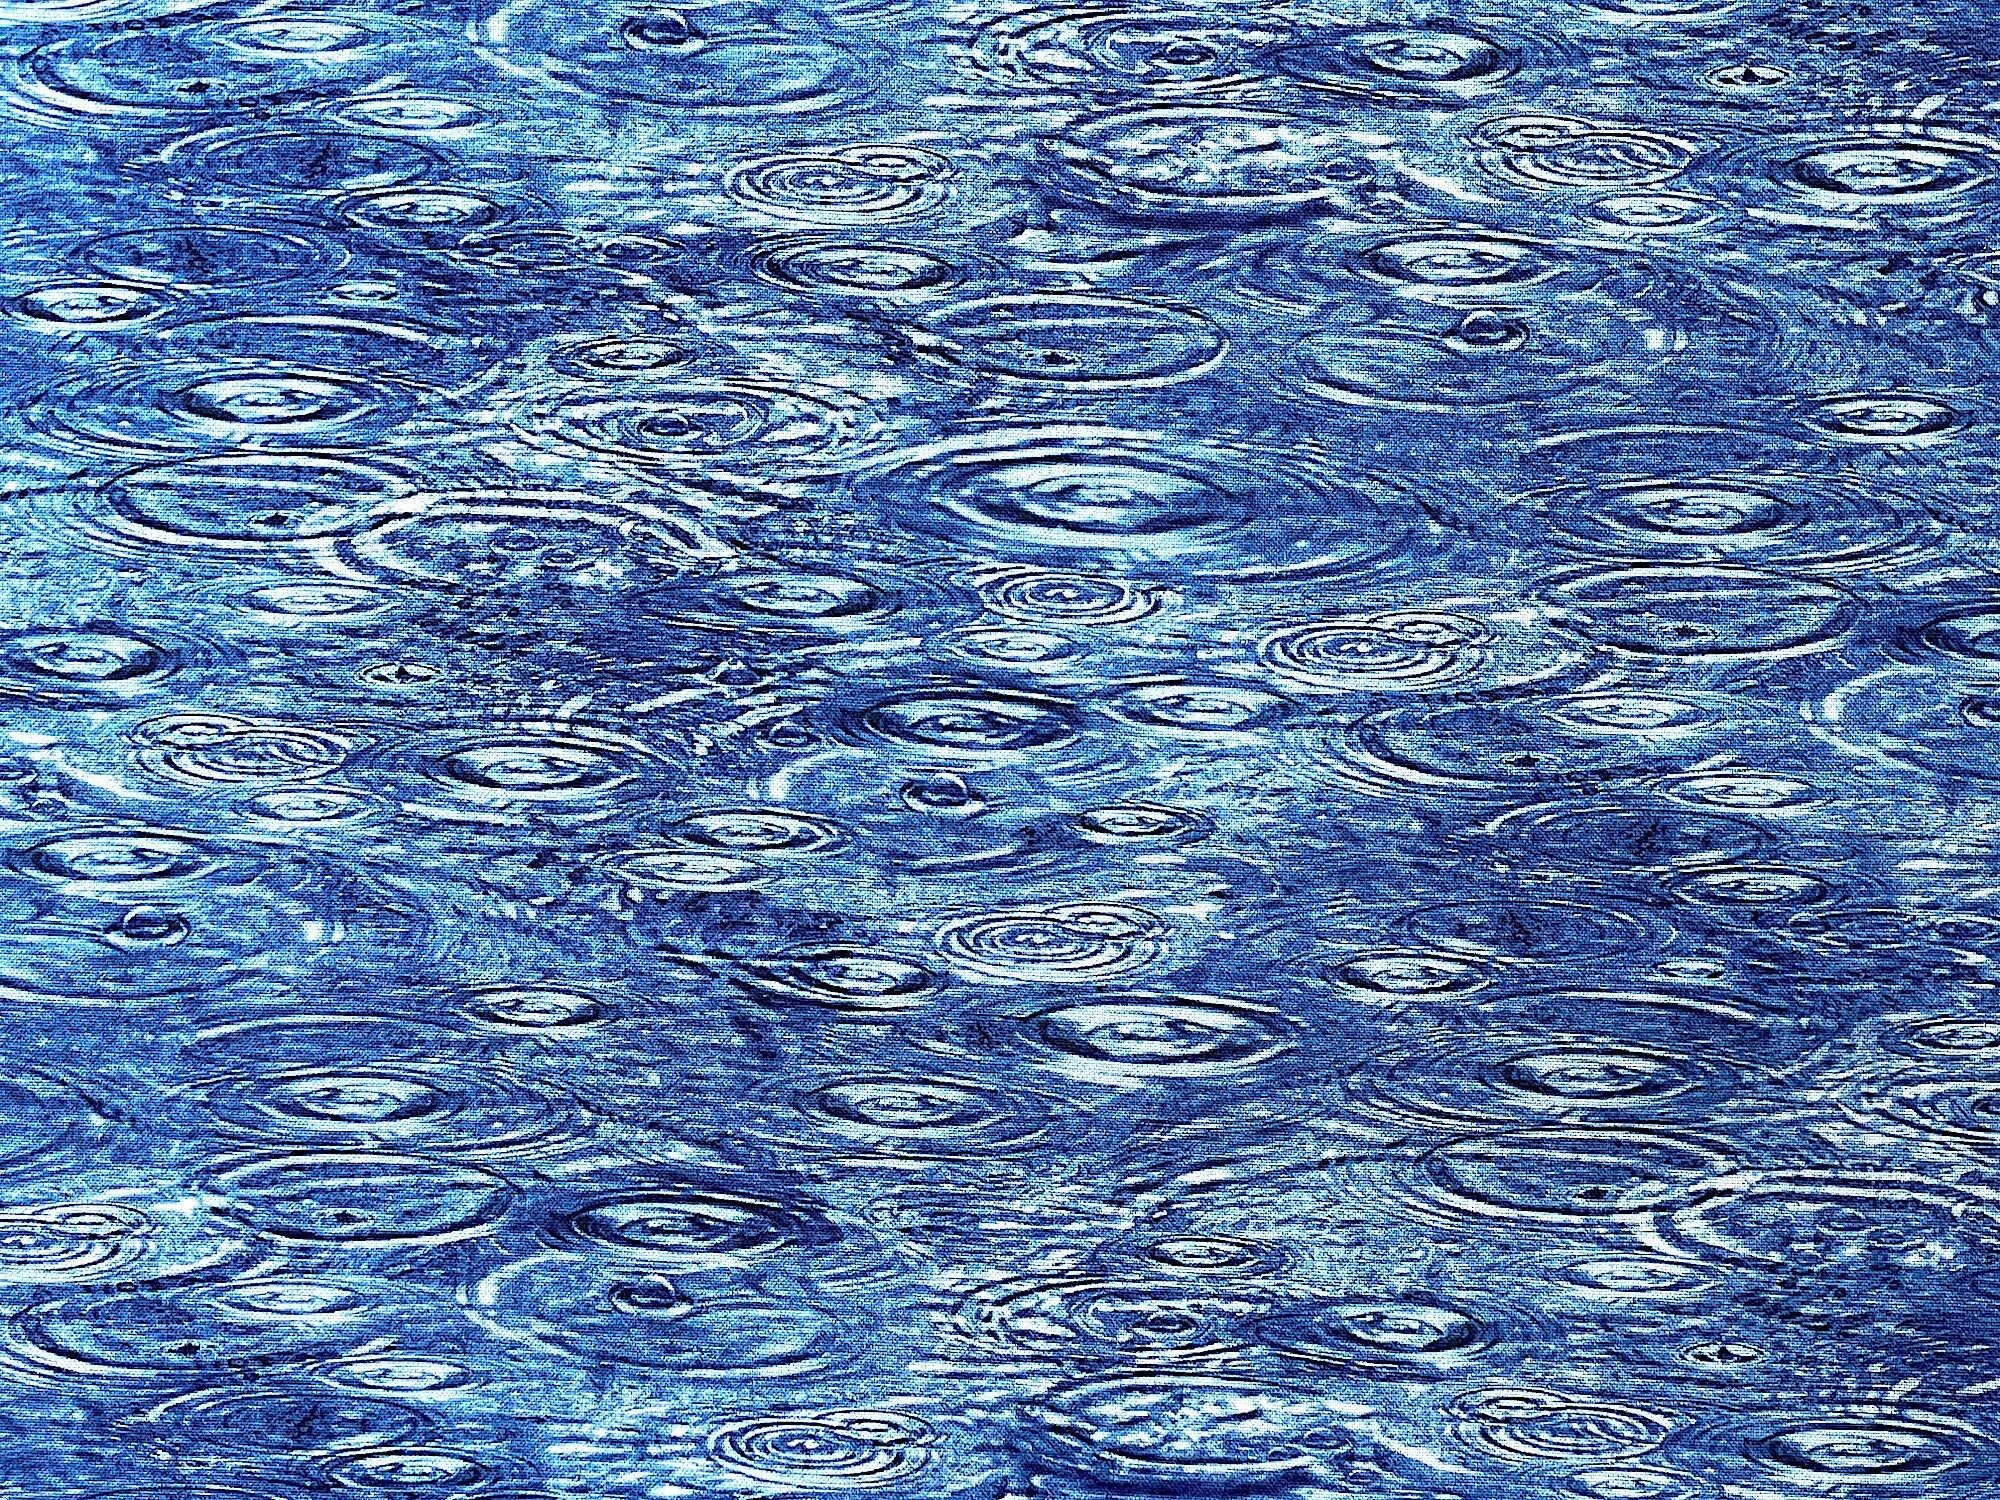 Cotton fabric covered with water falling in water.